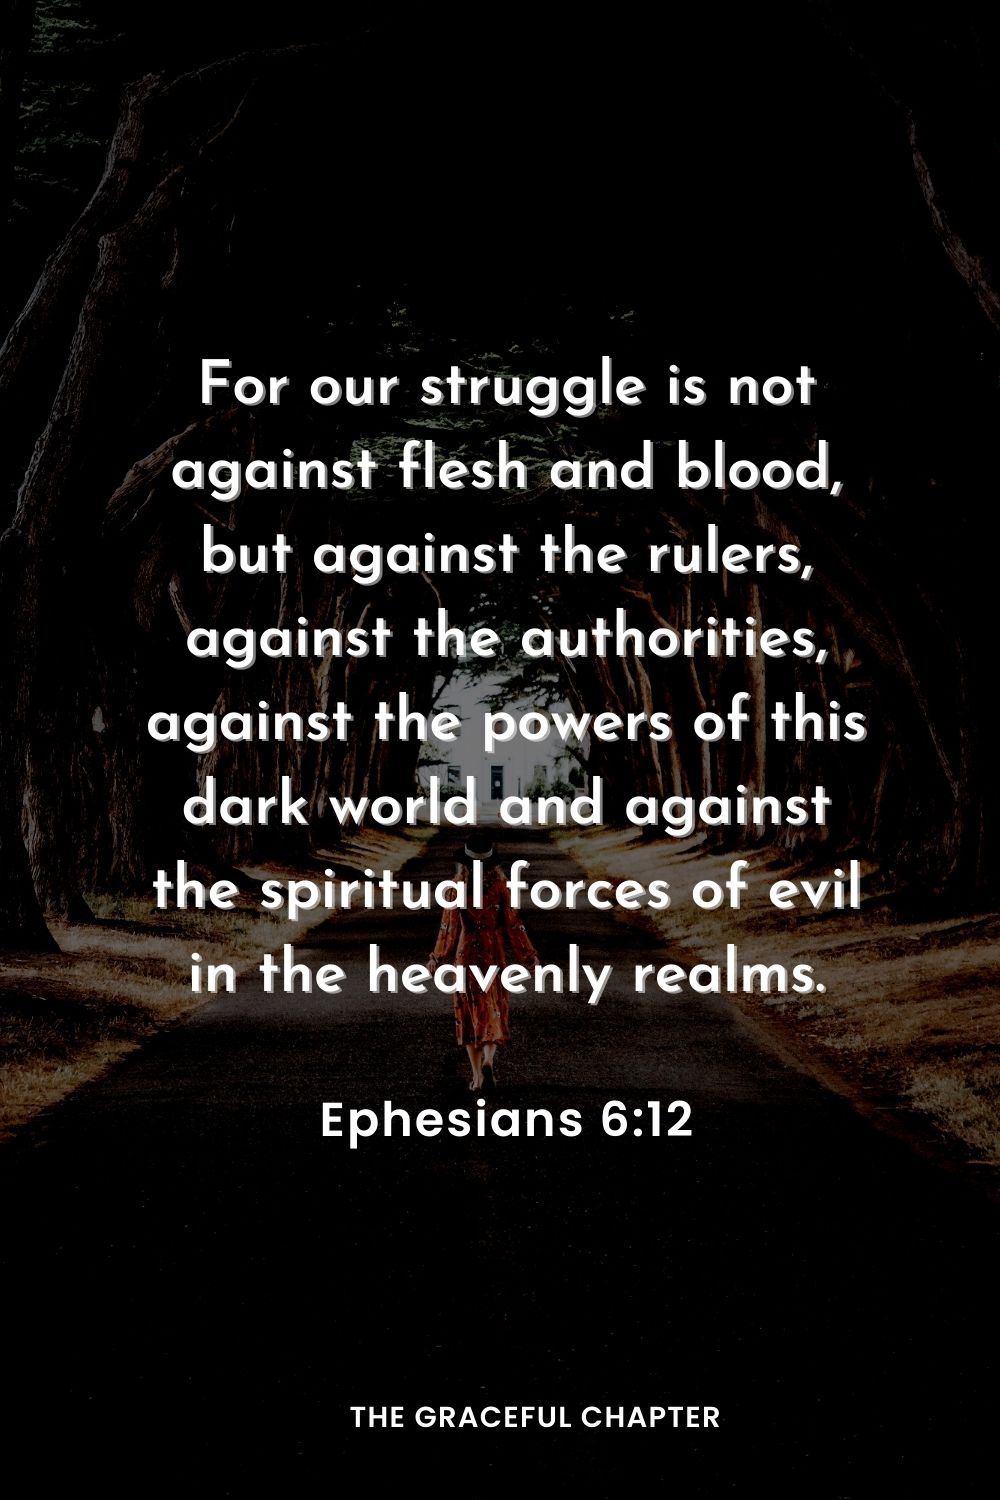 For our struggle is not against flesh and blood, but against the rulers, against the authorities, against the powers of this dark world and against the spiritual forces of evil in the heavenly realms.